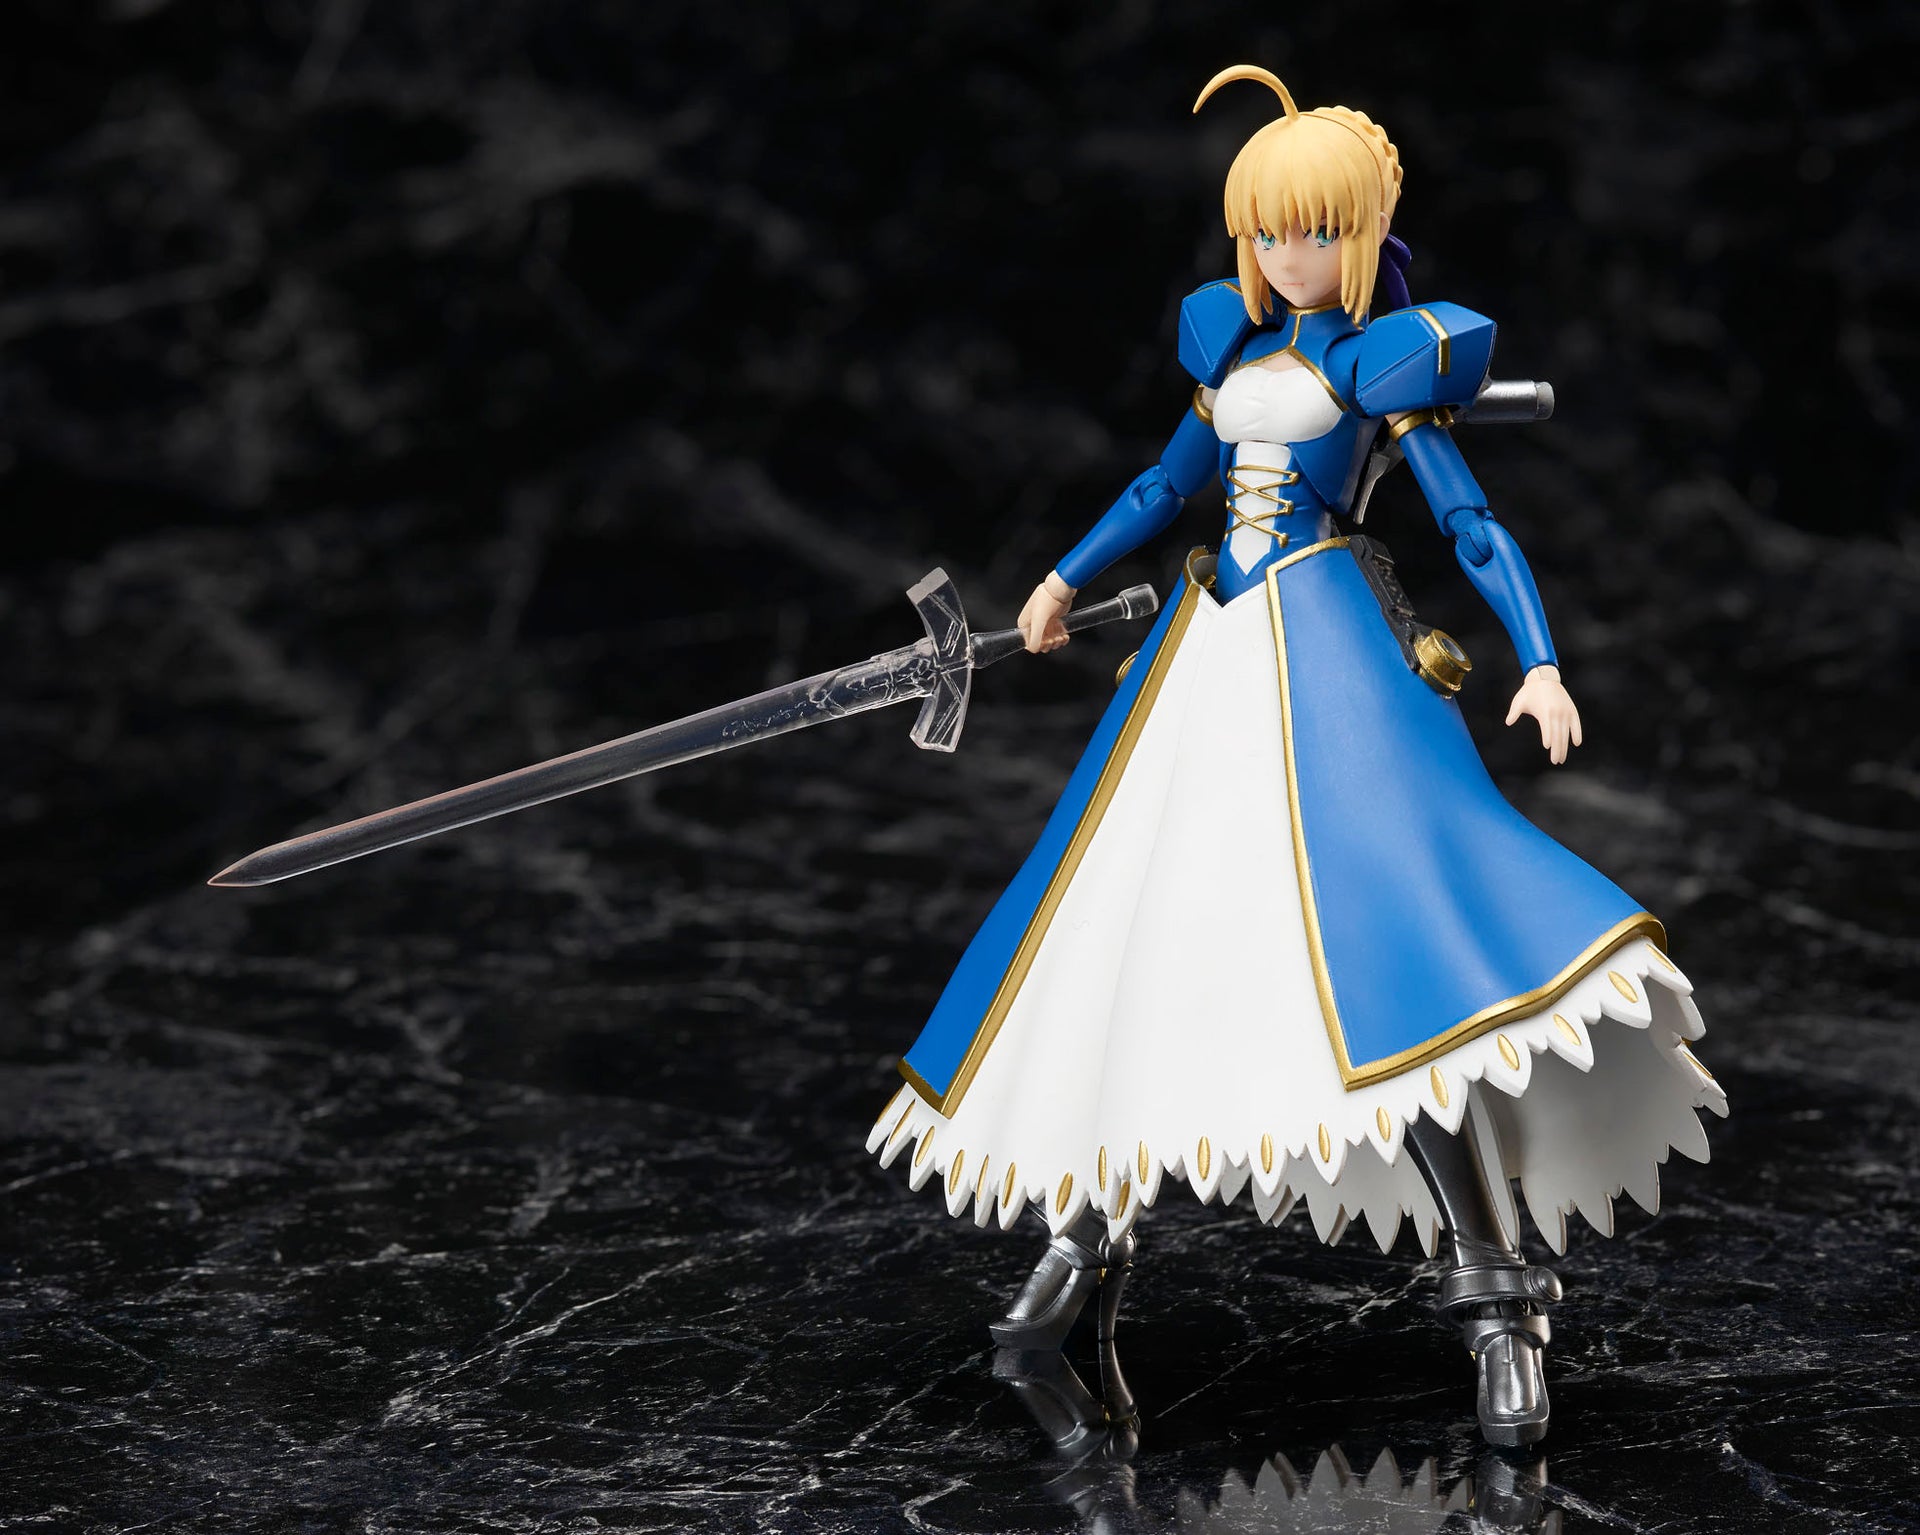 Bandai Armor Girls Project AGP Saber Altria Pendragon and Variable Excalibur Fate/Grand Order Action Figure